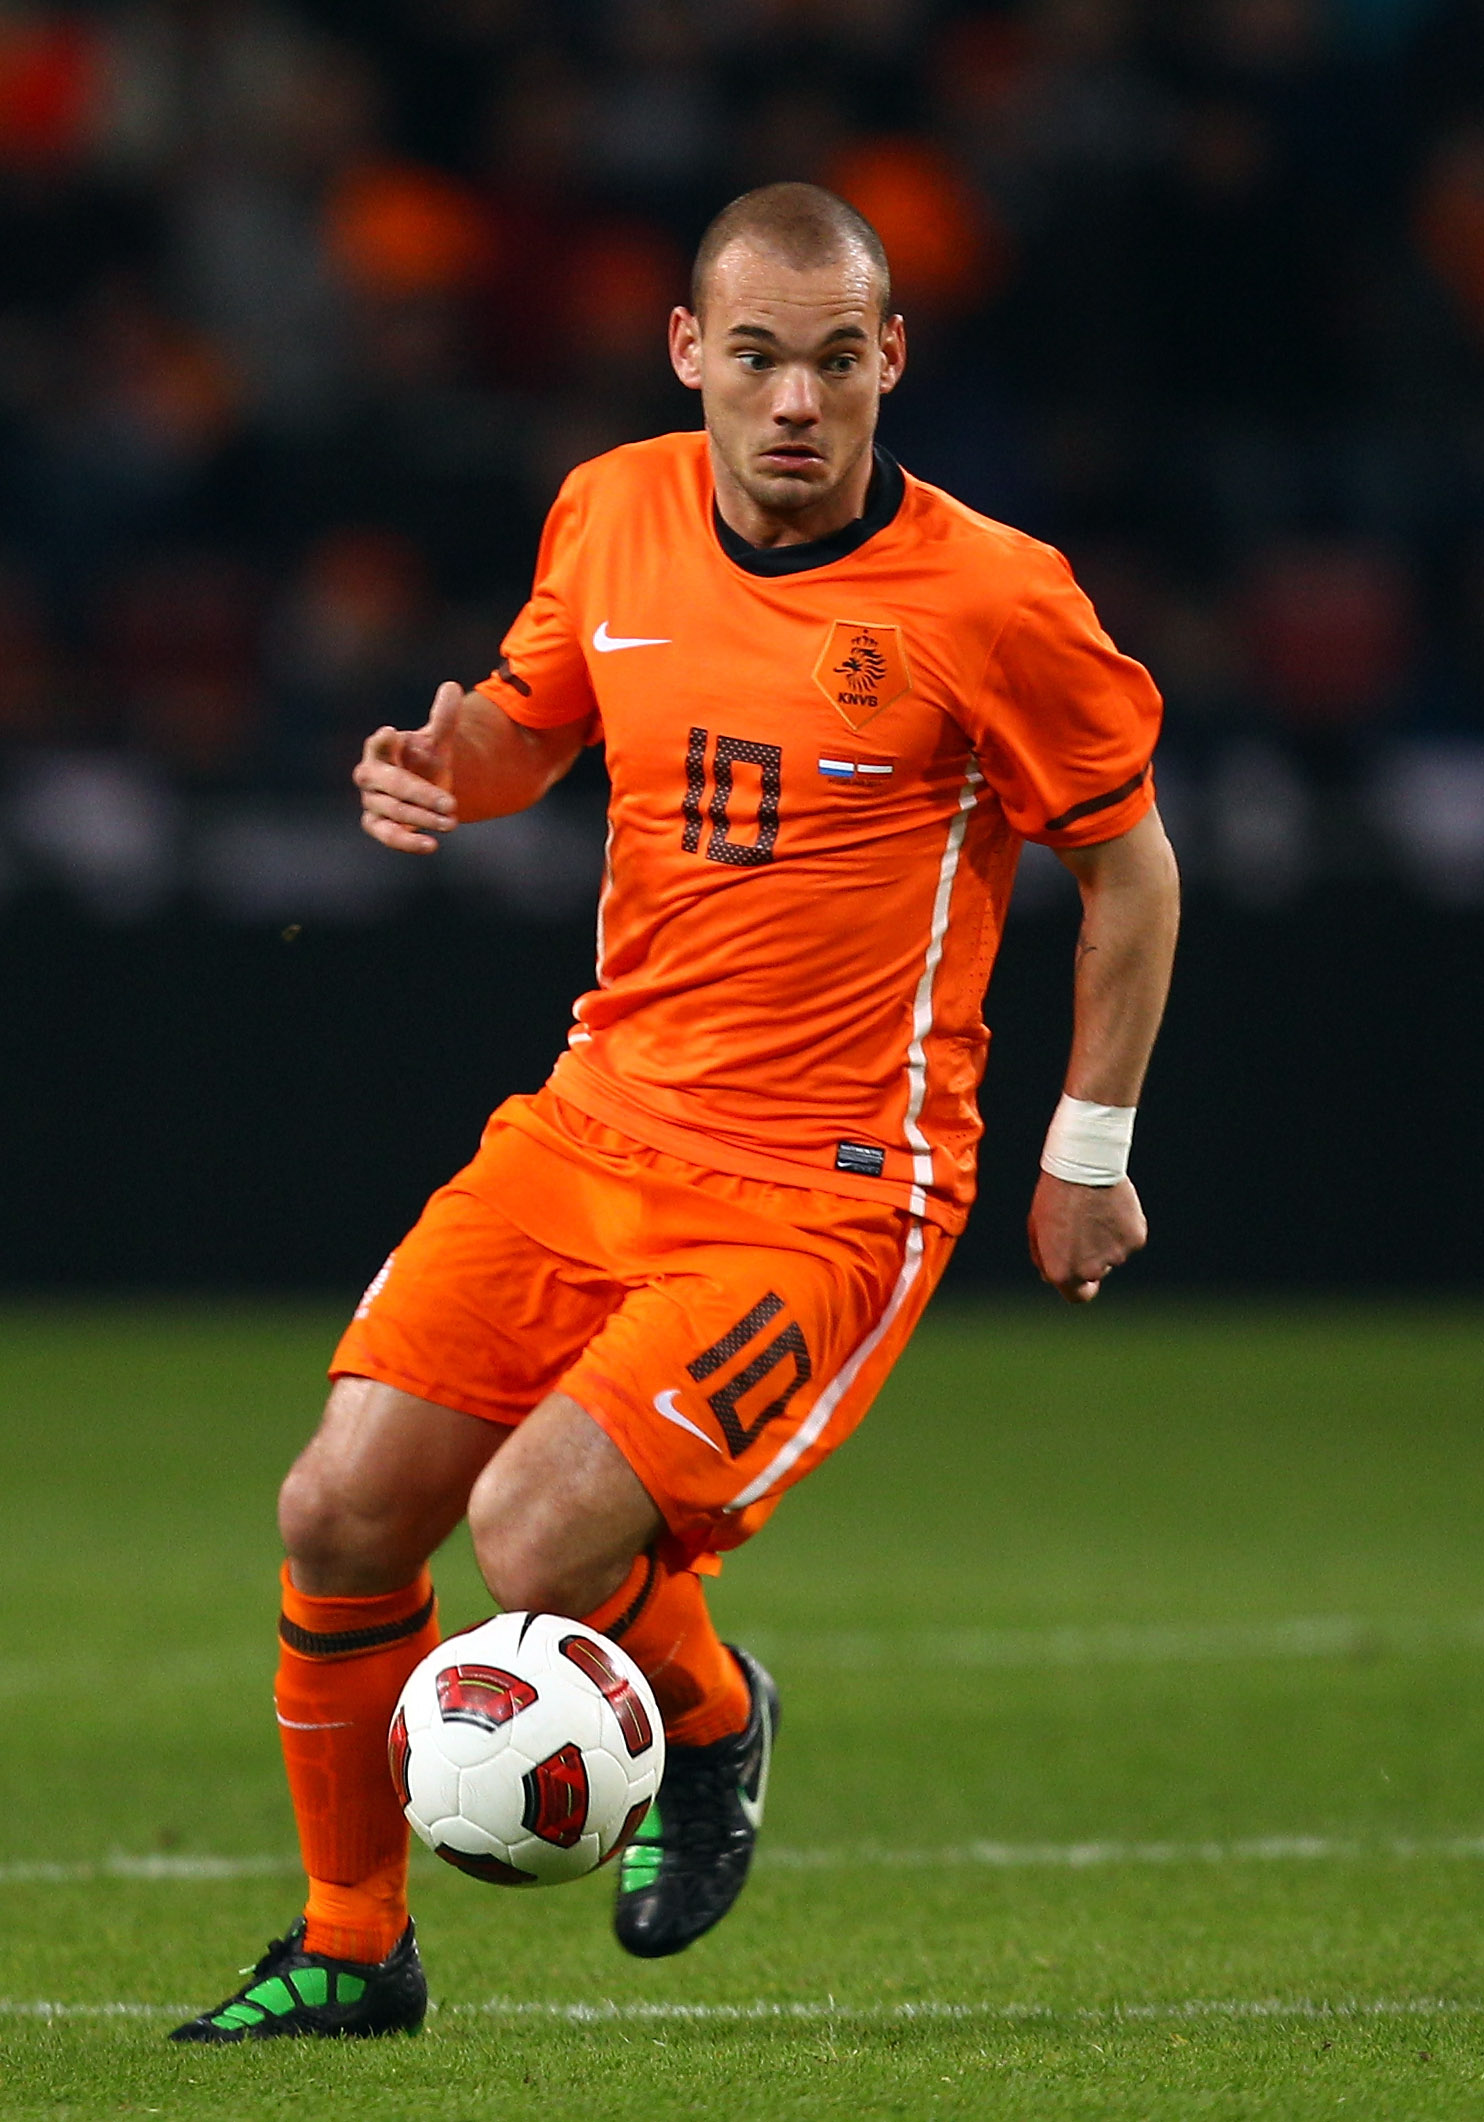 EINDHOVEN, NETHERLANDS - FEBRUARY 09:  Wesley Sneijder of The Netherlands during the International Friendly match between The Netherlands and Austria at the Phillips Stadion on February 9, 2011 in Eindhoven, Netherlands.  (Photo by Richard Heathcote/Getty